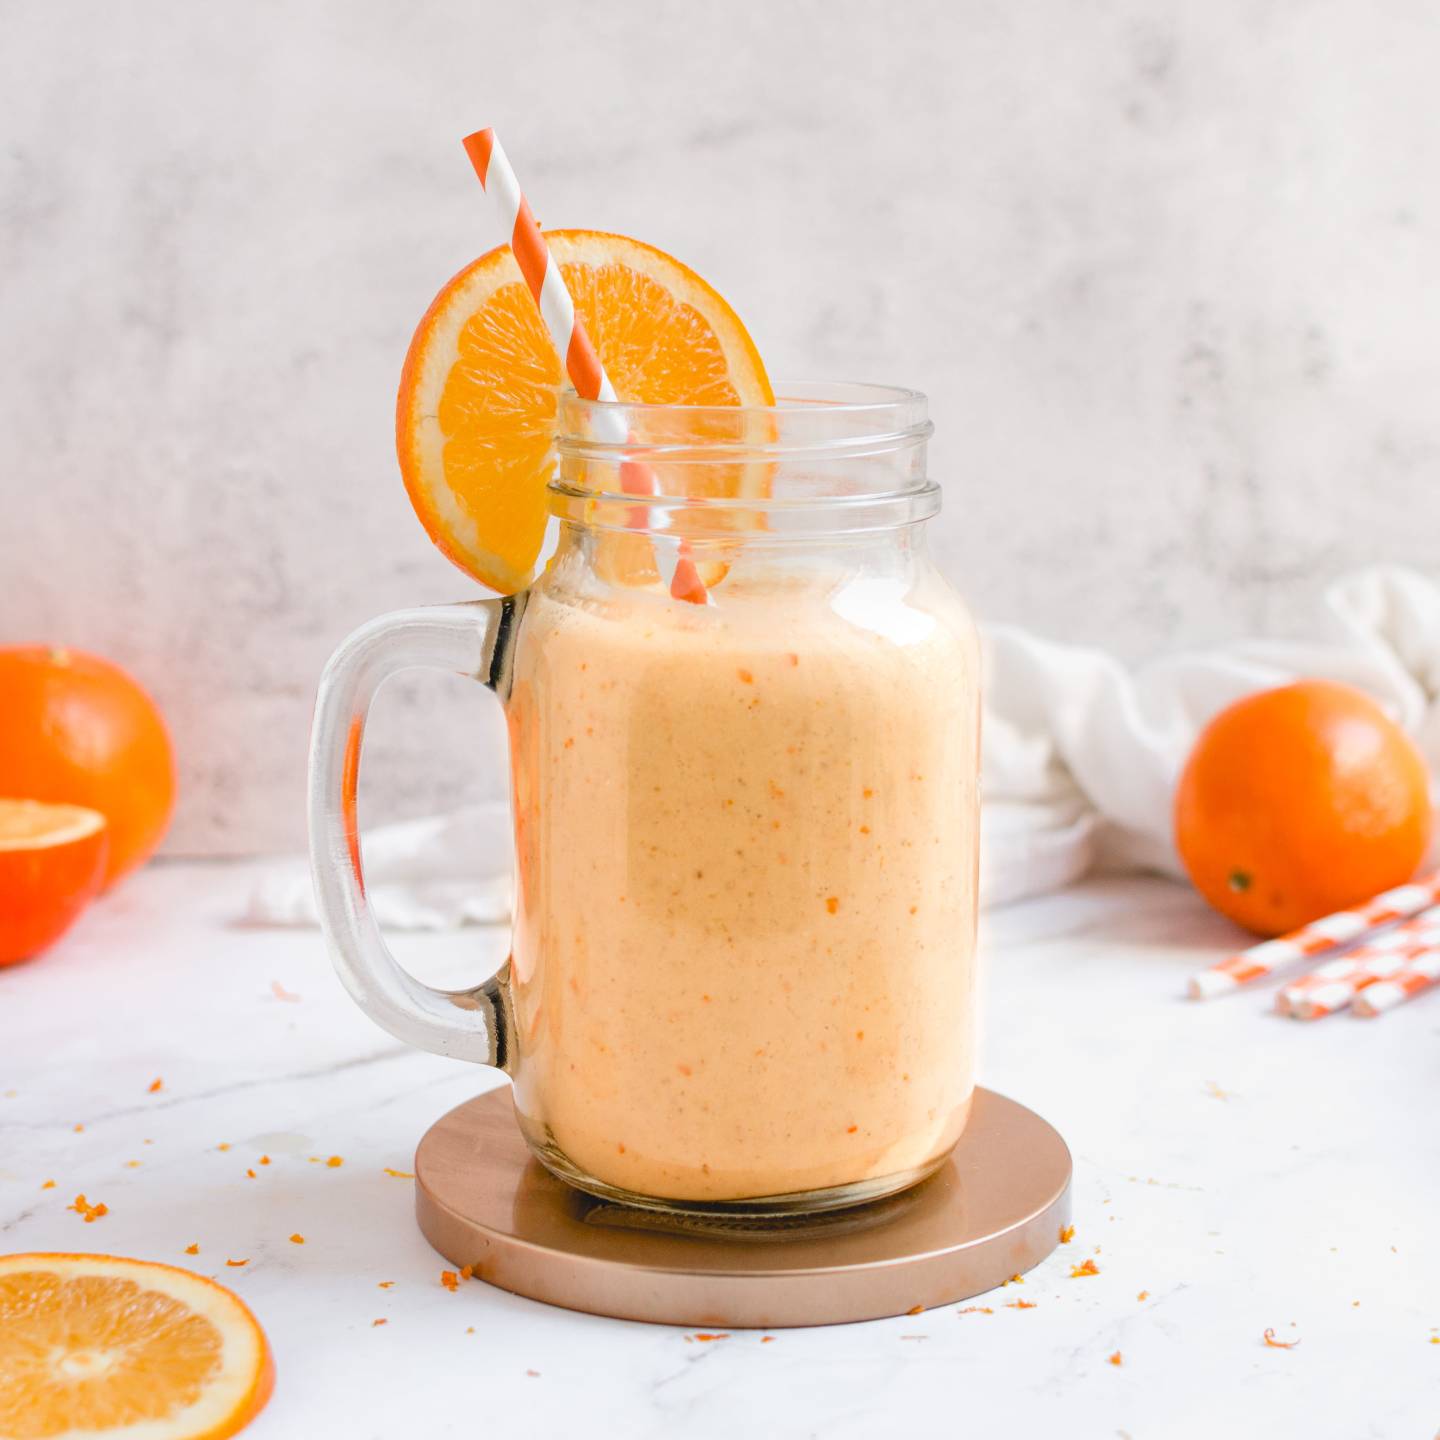 Orange creamsicle smoothie made with bananas and oranges in a glass with an orange striped straw.